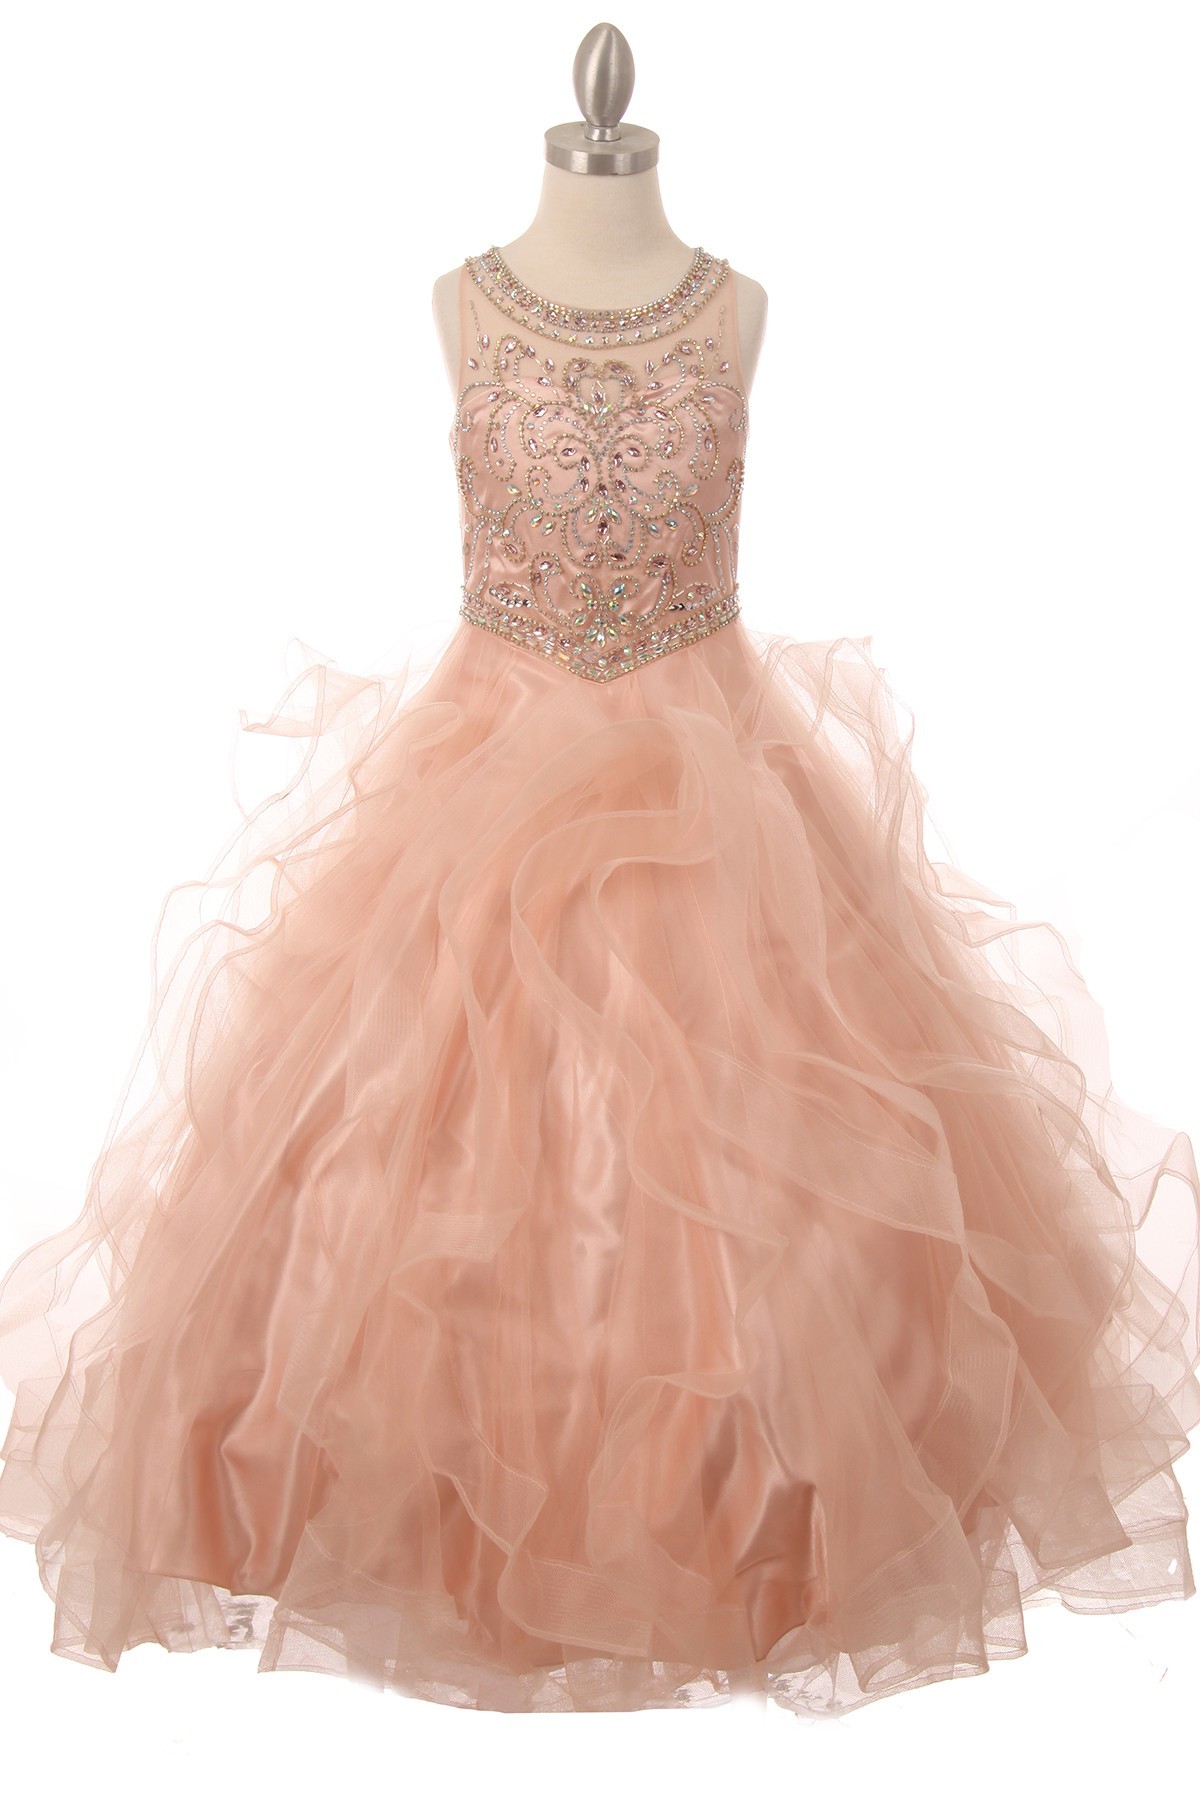 Girls pageant ball gowns